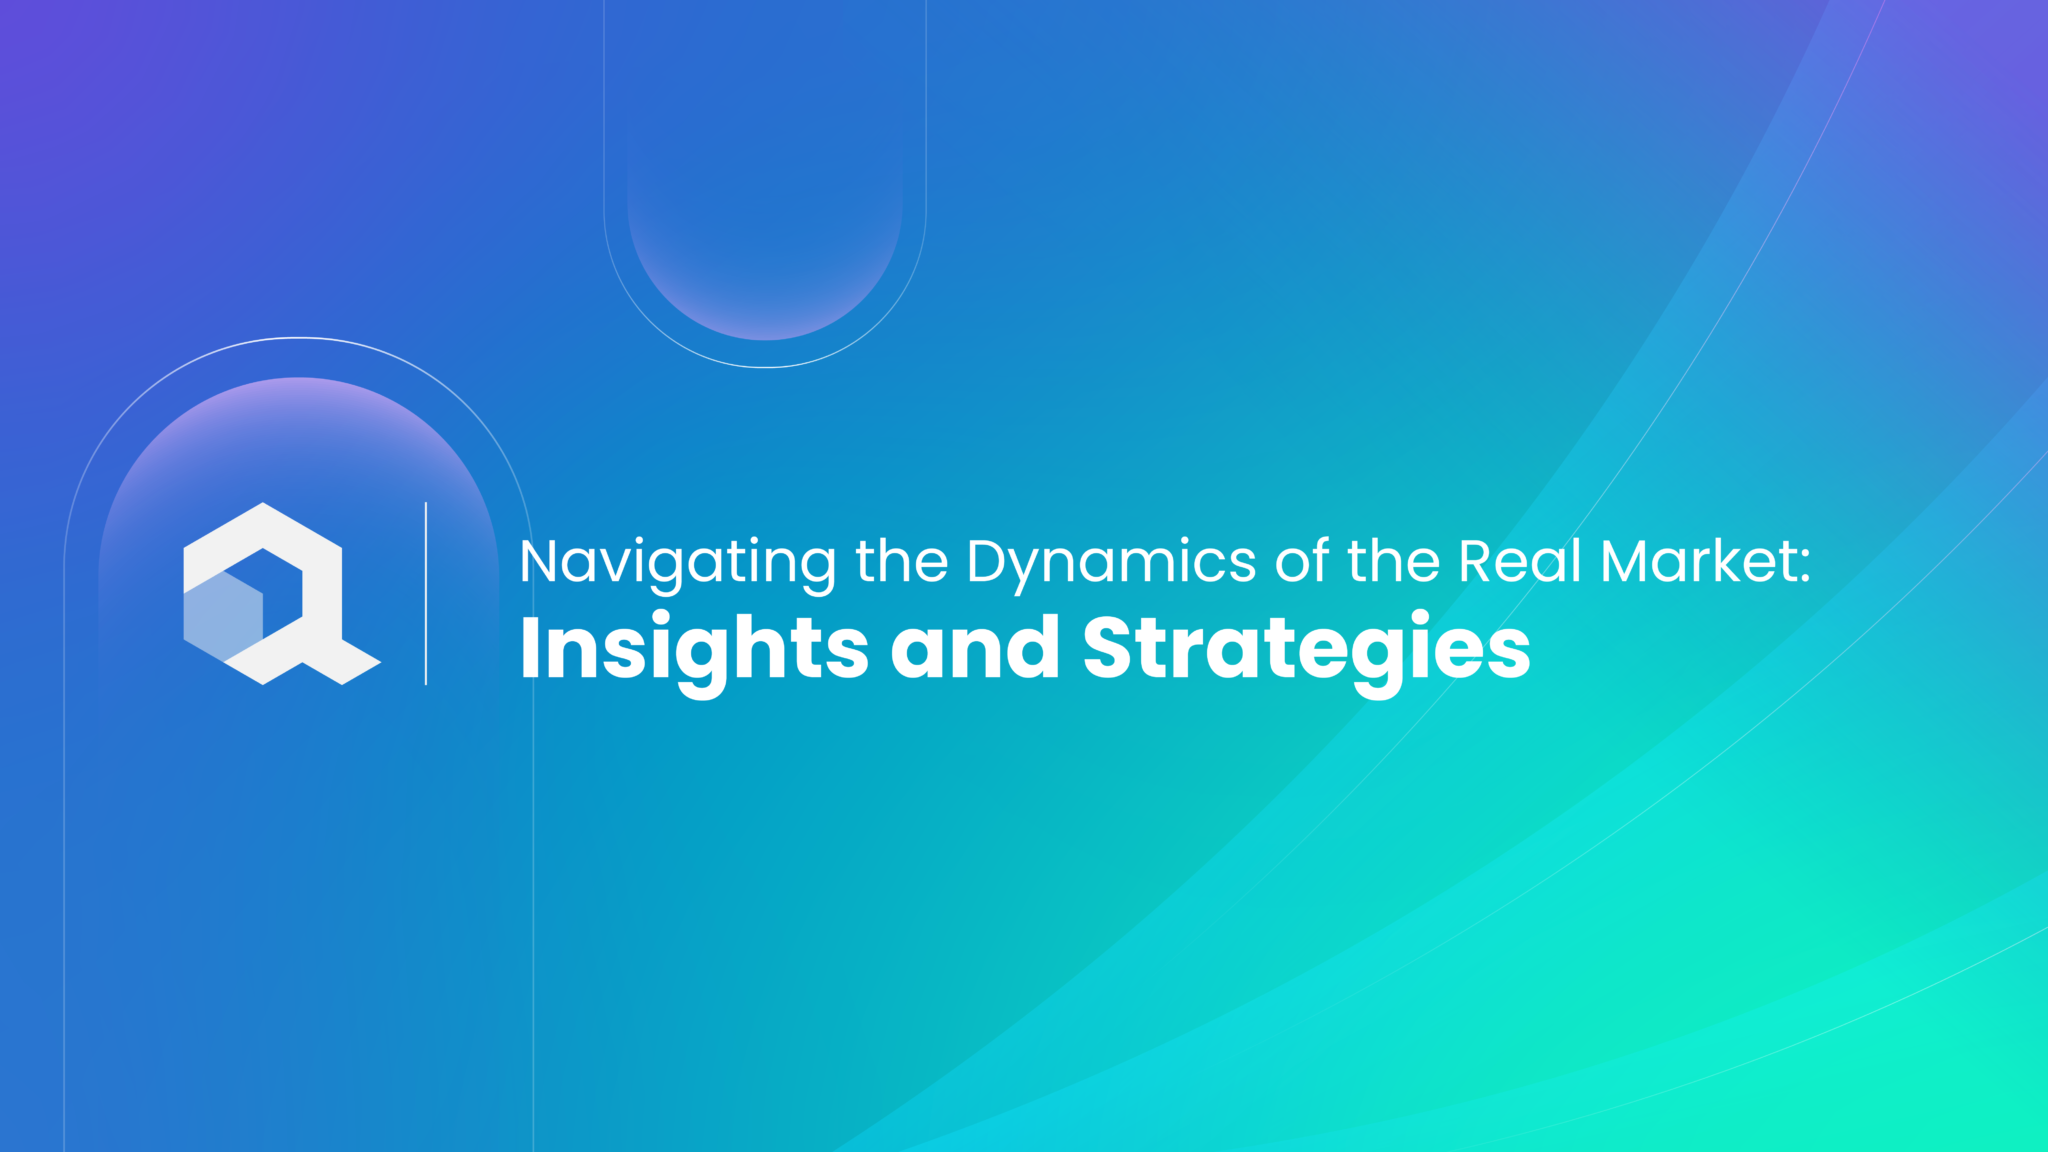 Navigating the Dynamics of the Real Market Insights and Strategies